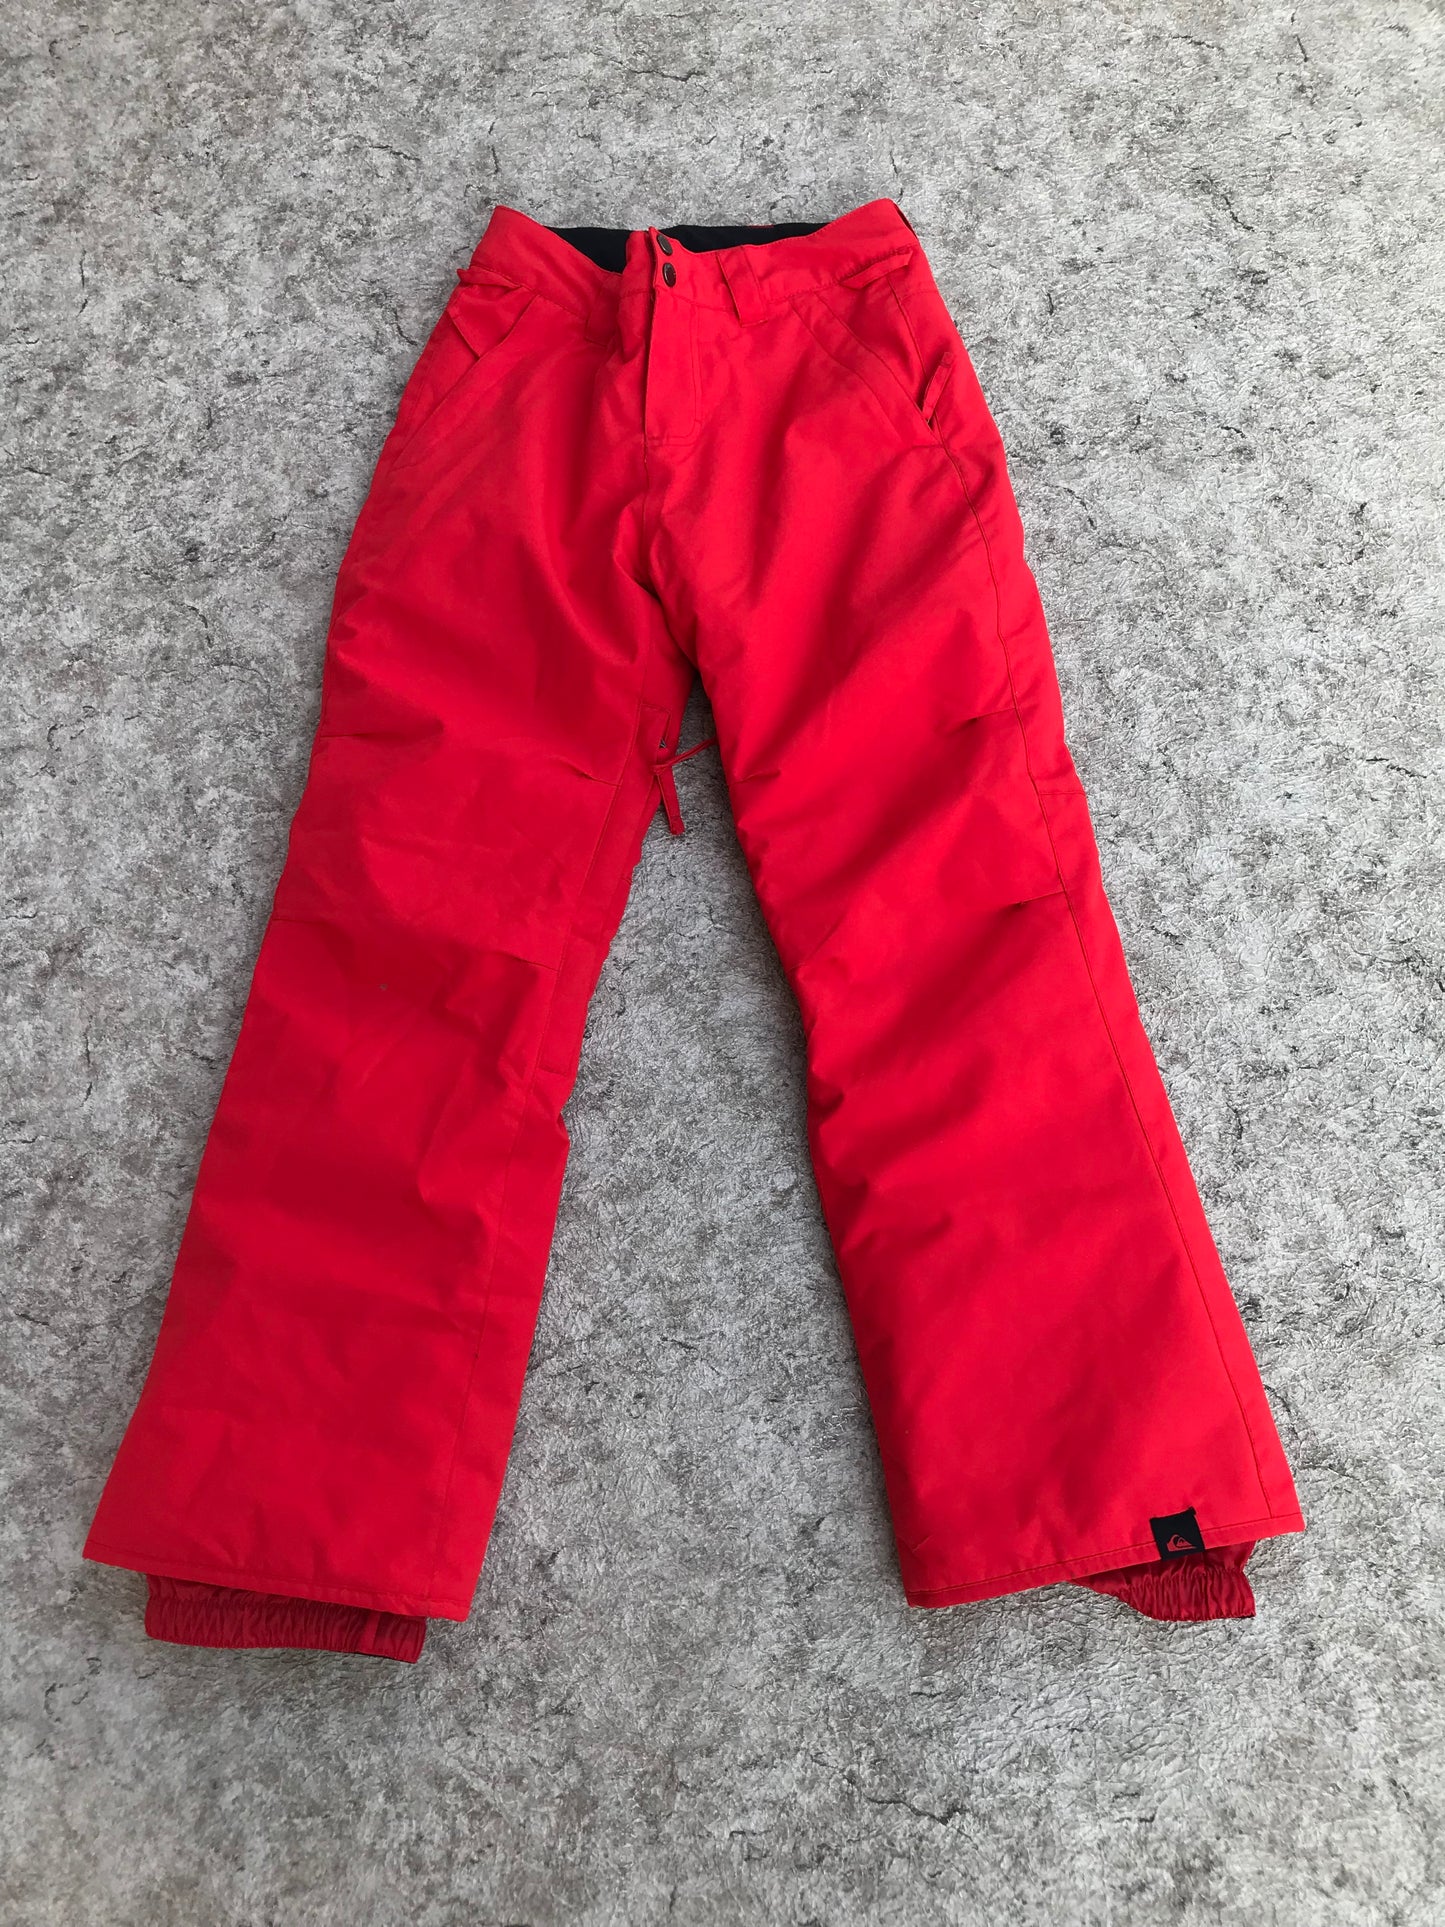 Snow Pants Child Size 12 Quicksilver Snowboarding Flat Brick Red As New